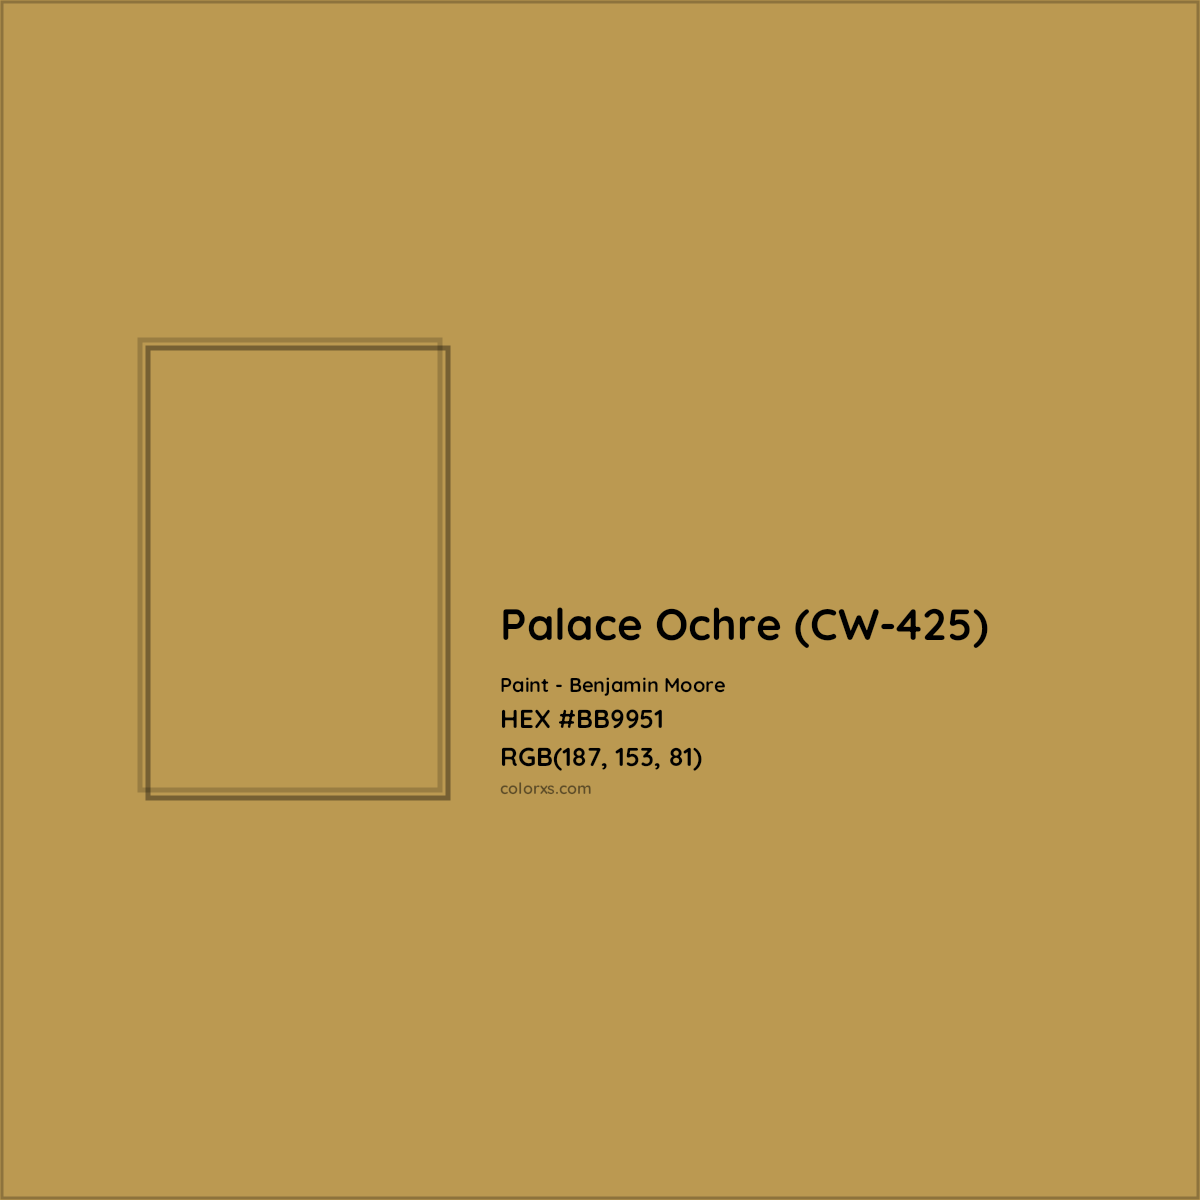 HEX #BB9951 Palace Ochre (CW-425) Paint Benjamin Moore - Color Code